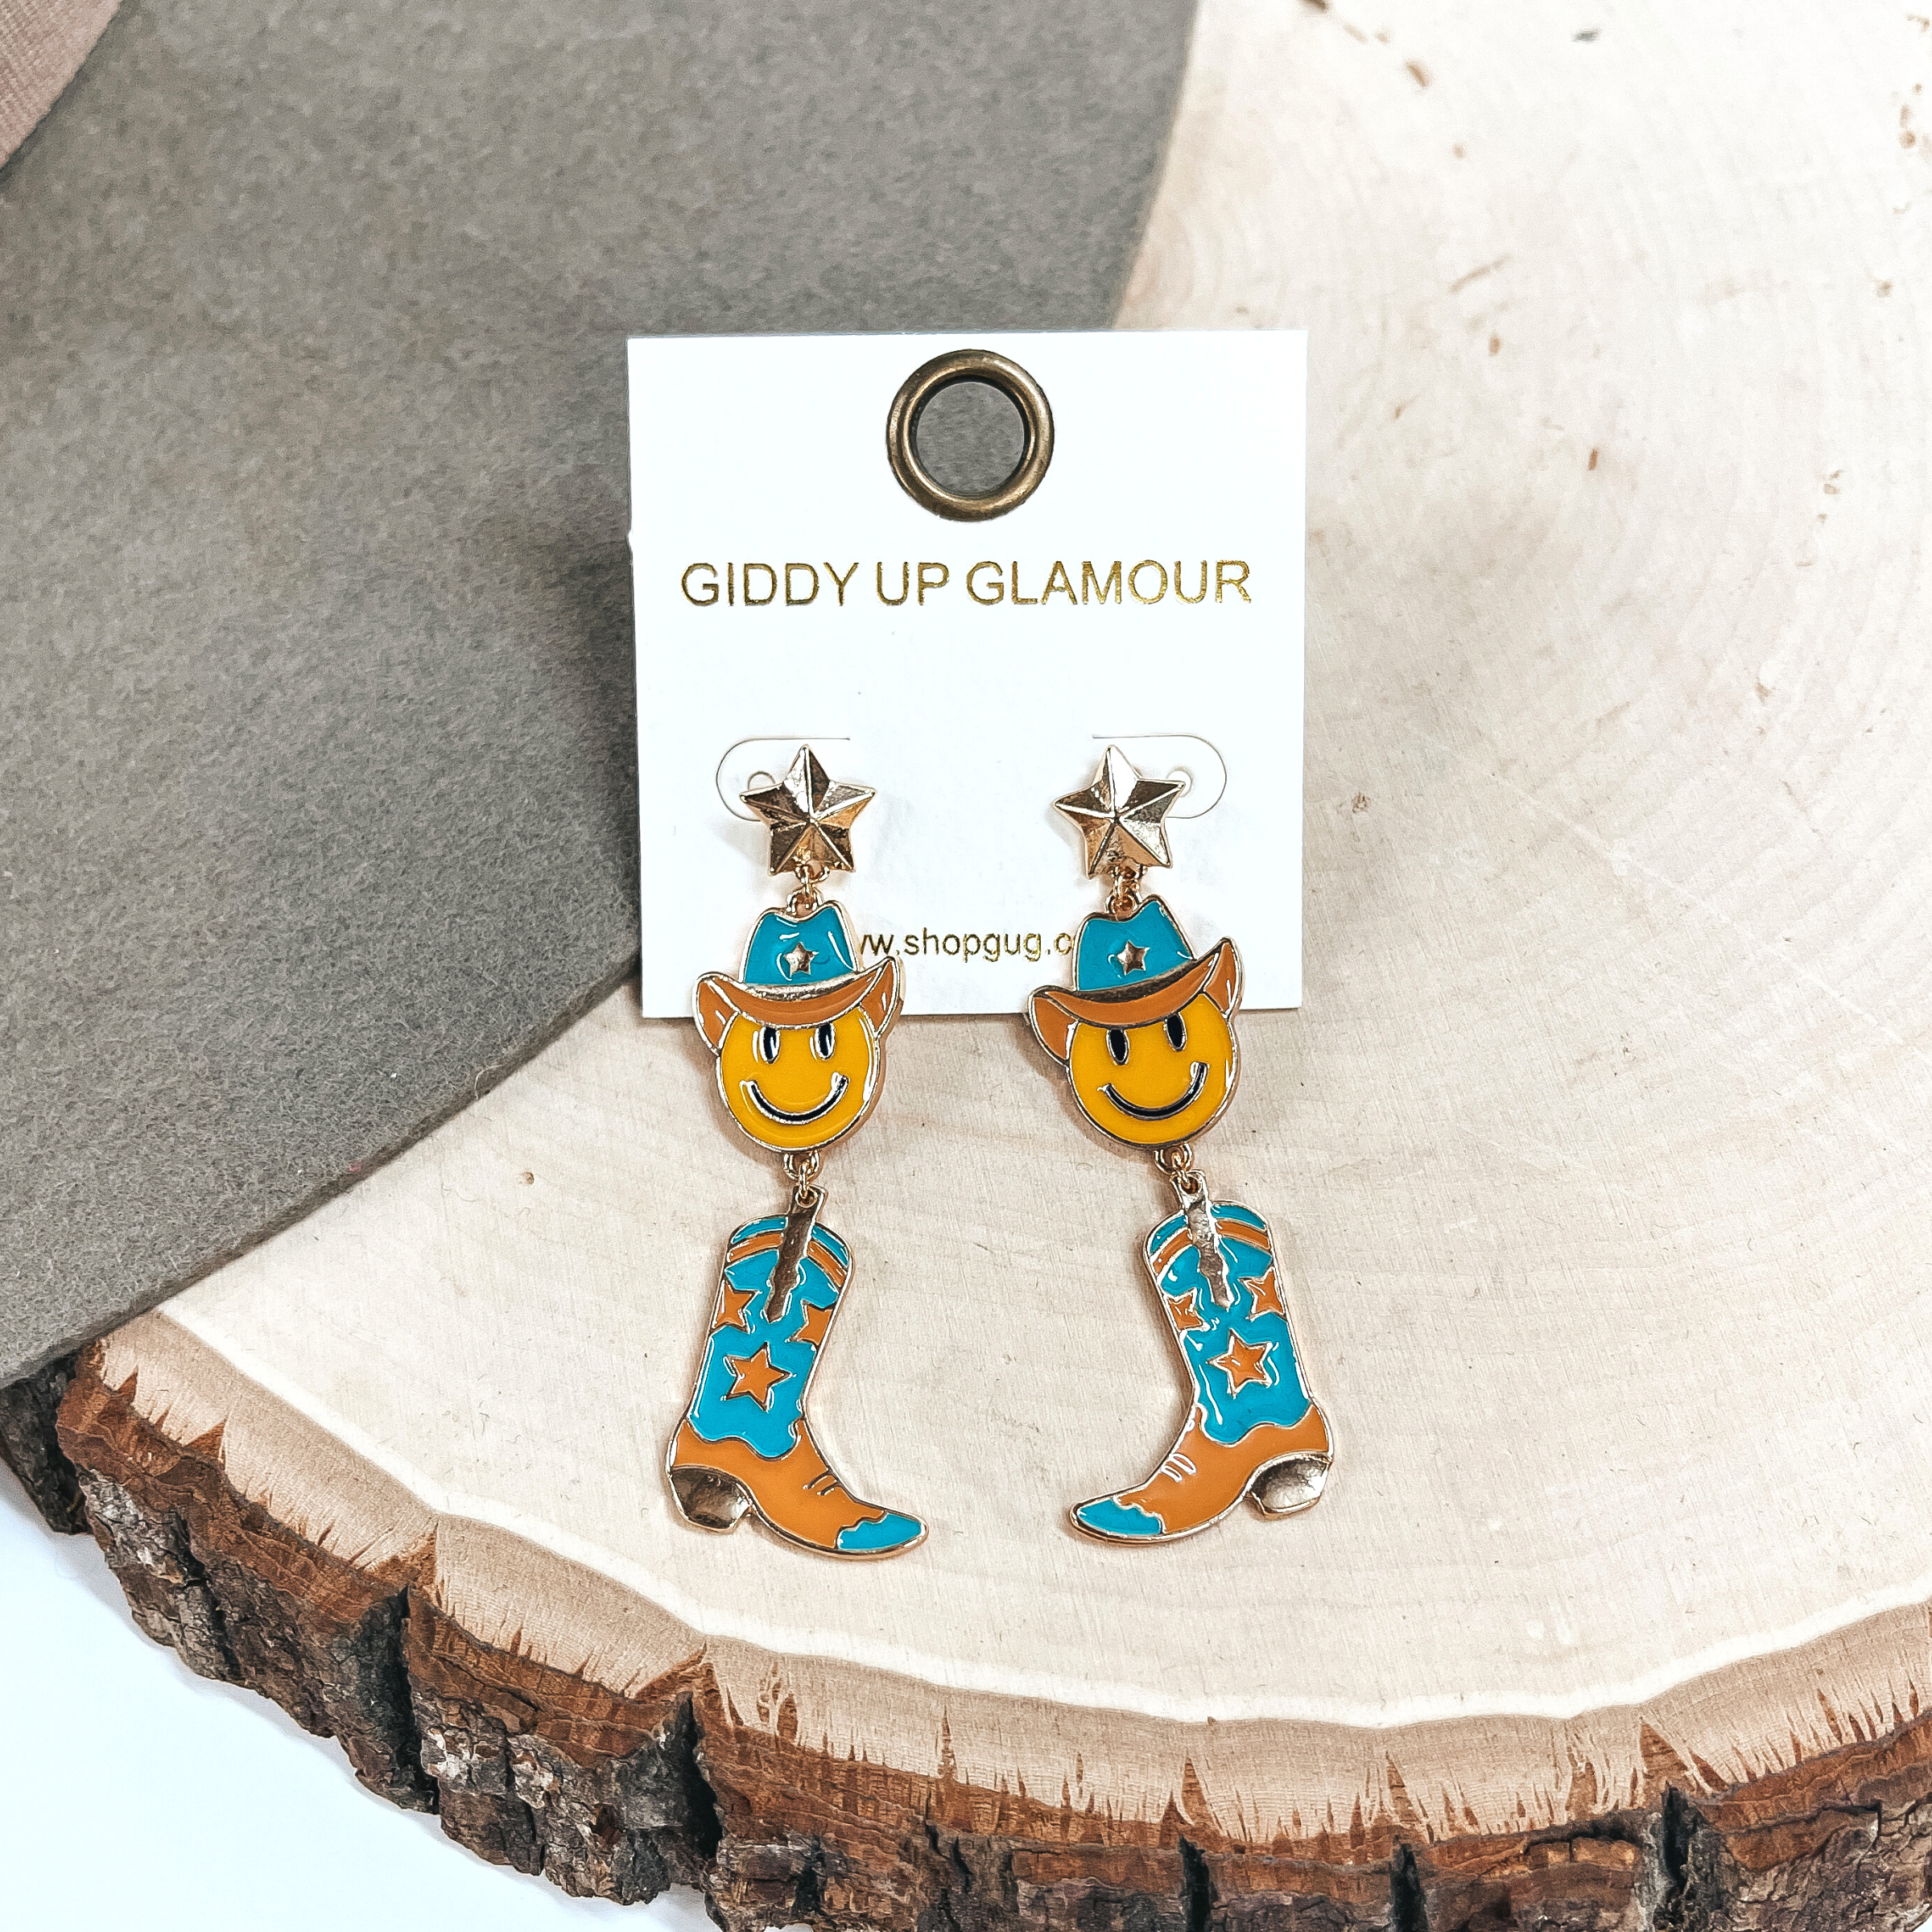 On The Fly Gold Tone Star Post Earrings with Happy Face Cowboy and Boot Pendant Earrings in Turquoise - Giddy Up Glamour Boutique